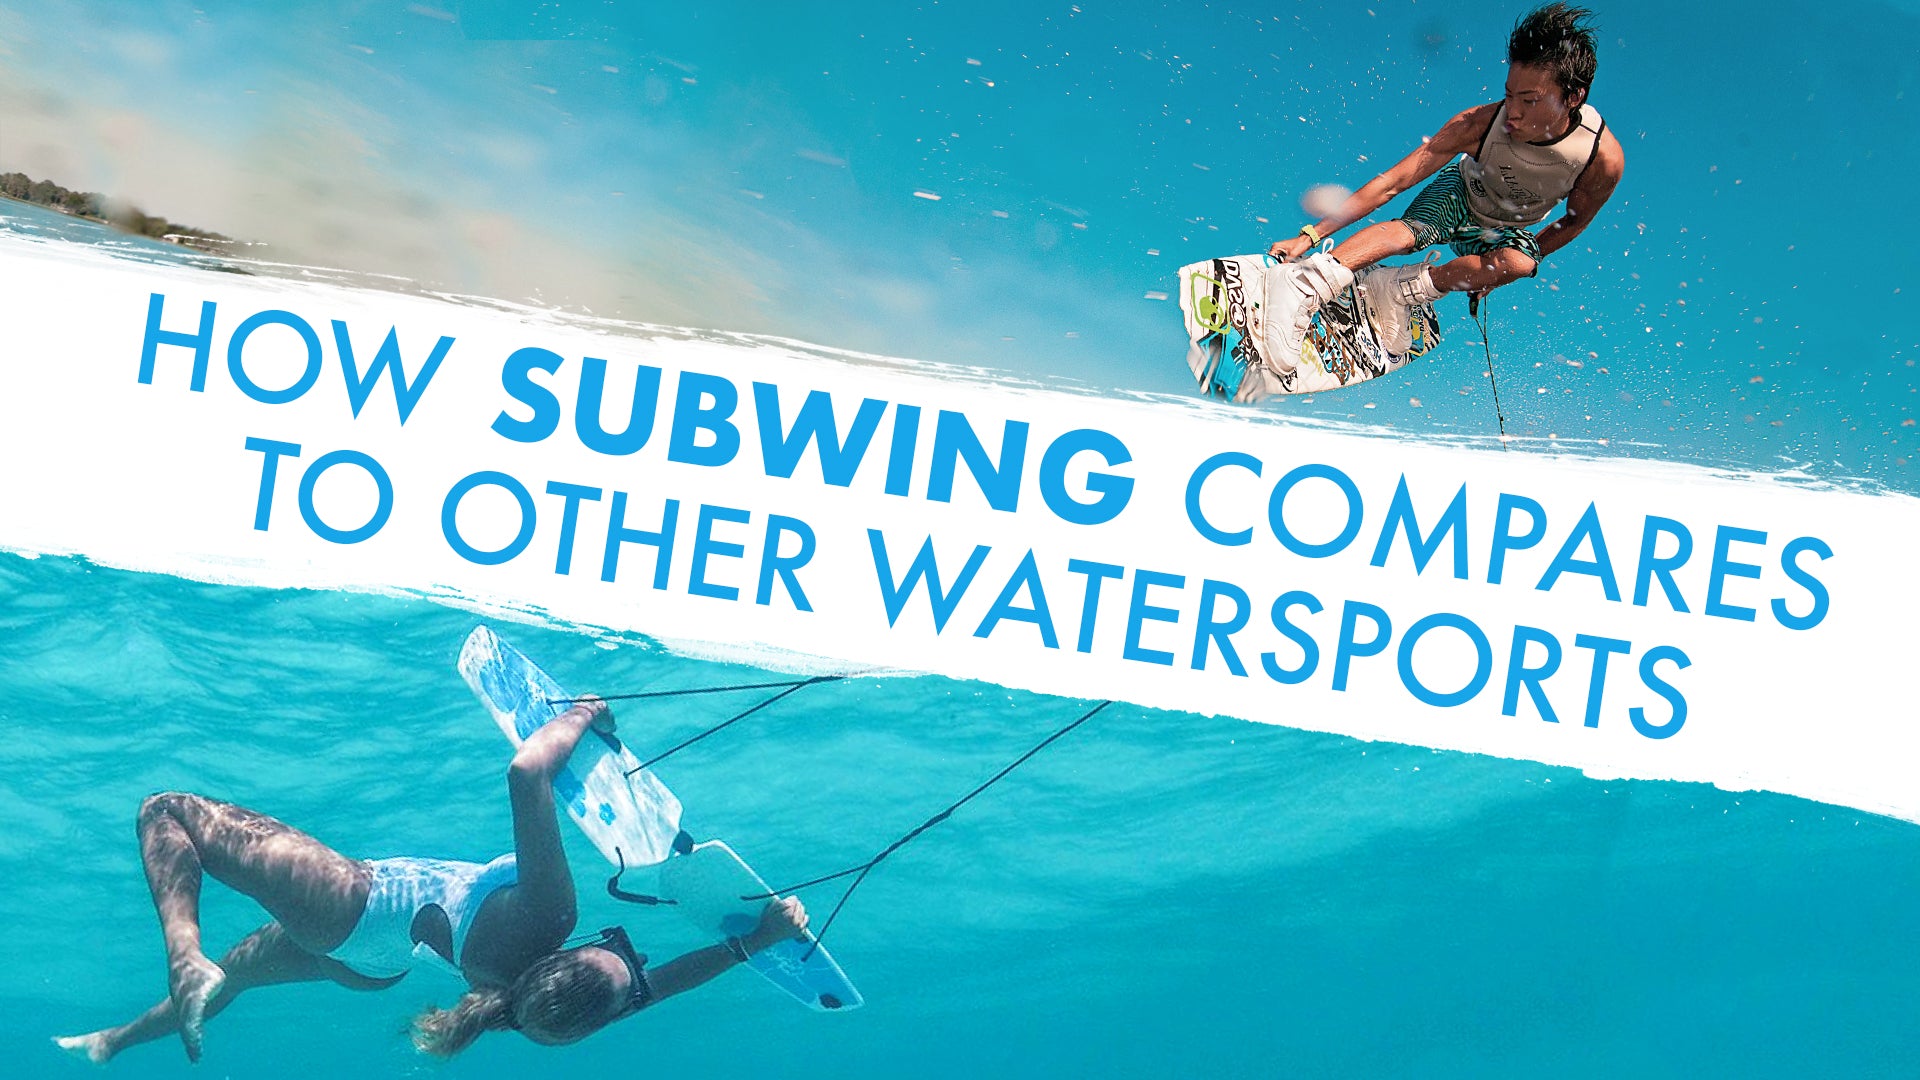 How Subwing compares to other watersports wakeboard 